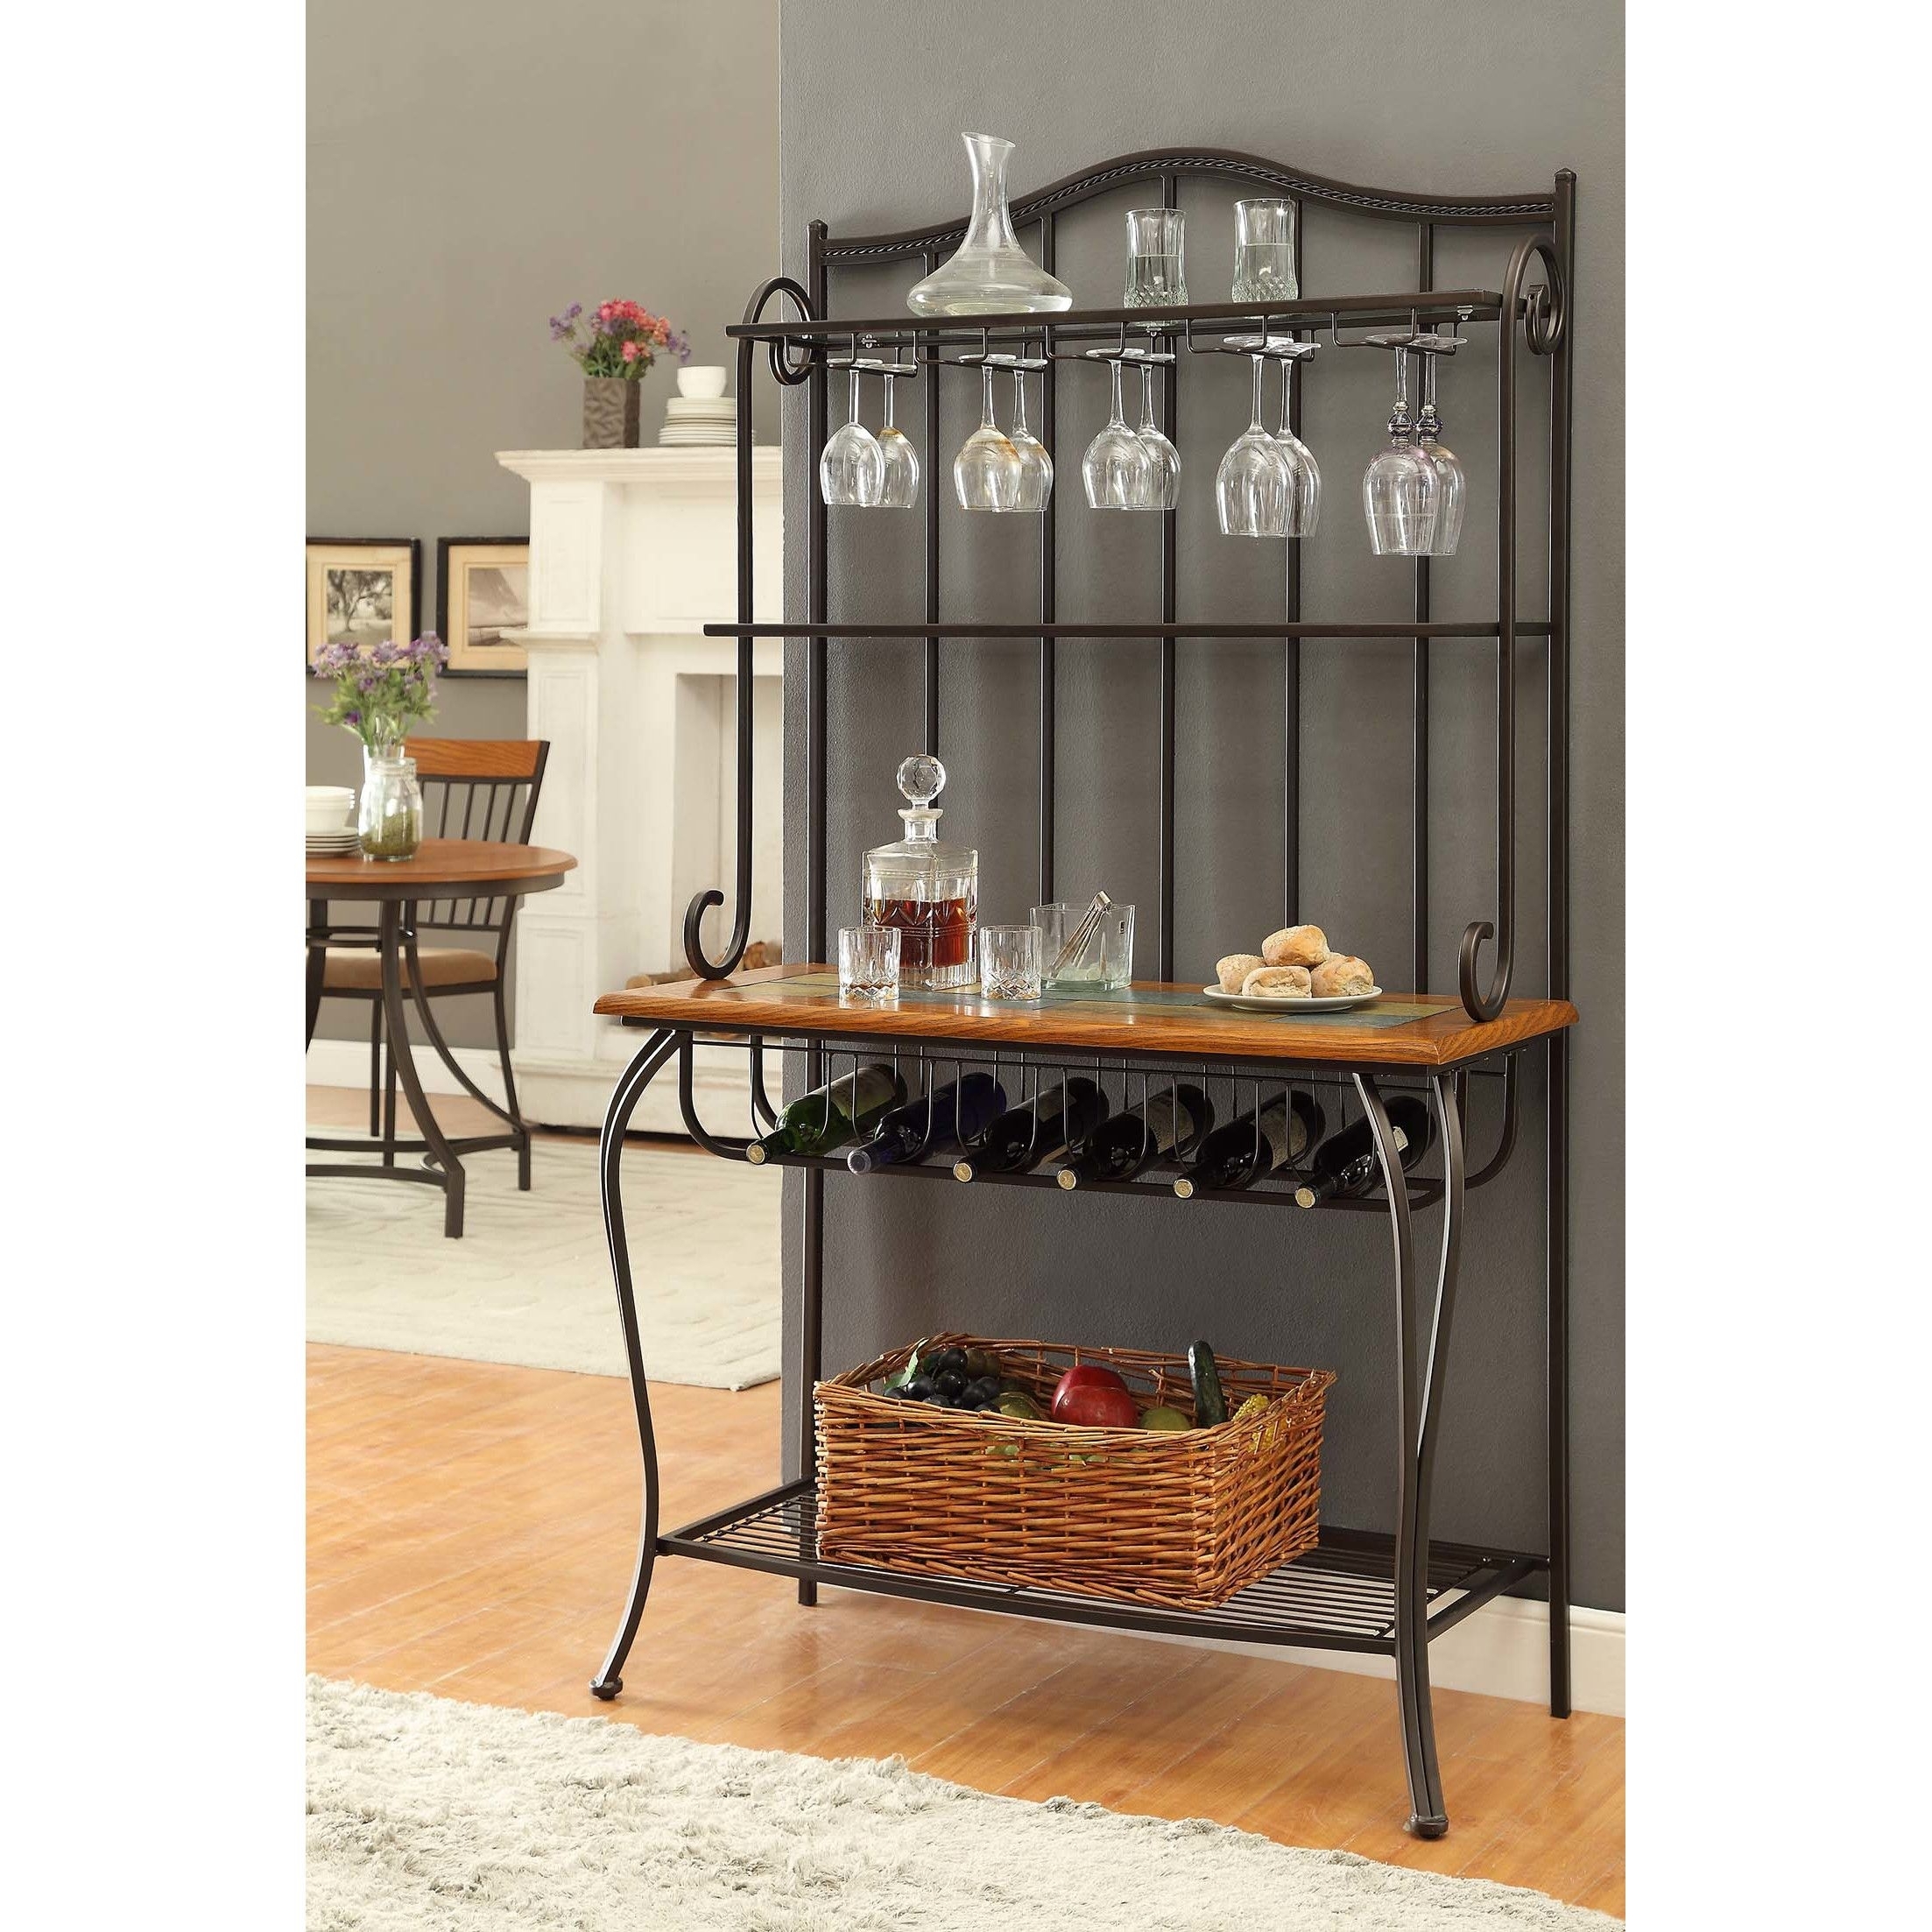 Wrought Iron Bakers Rack With Wine Rack 